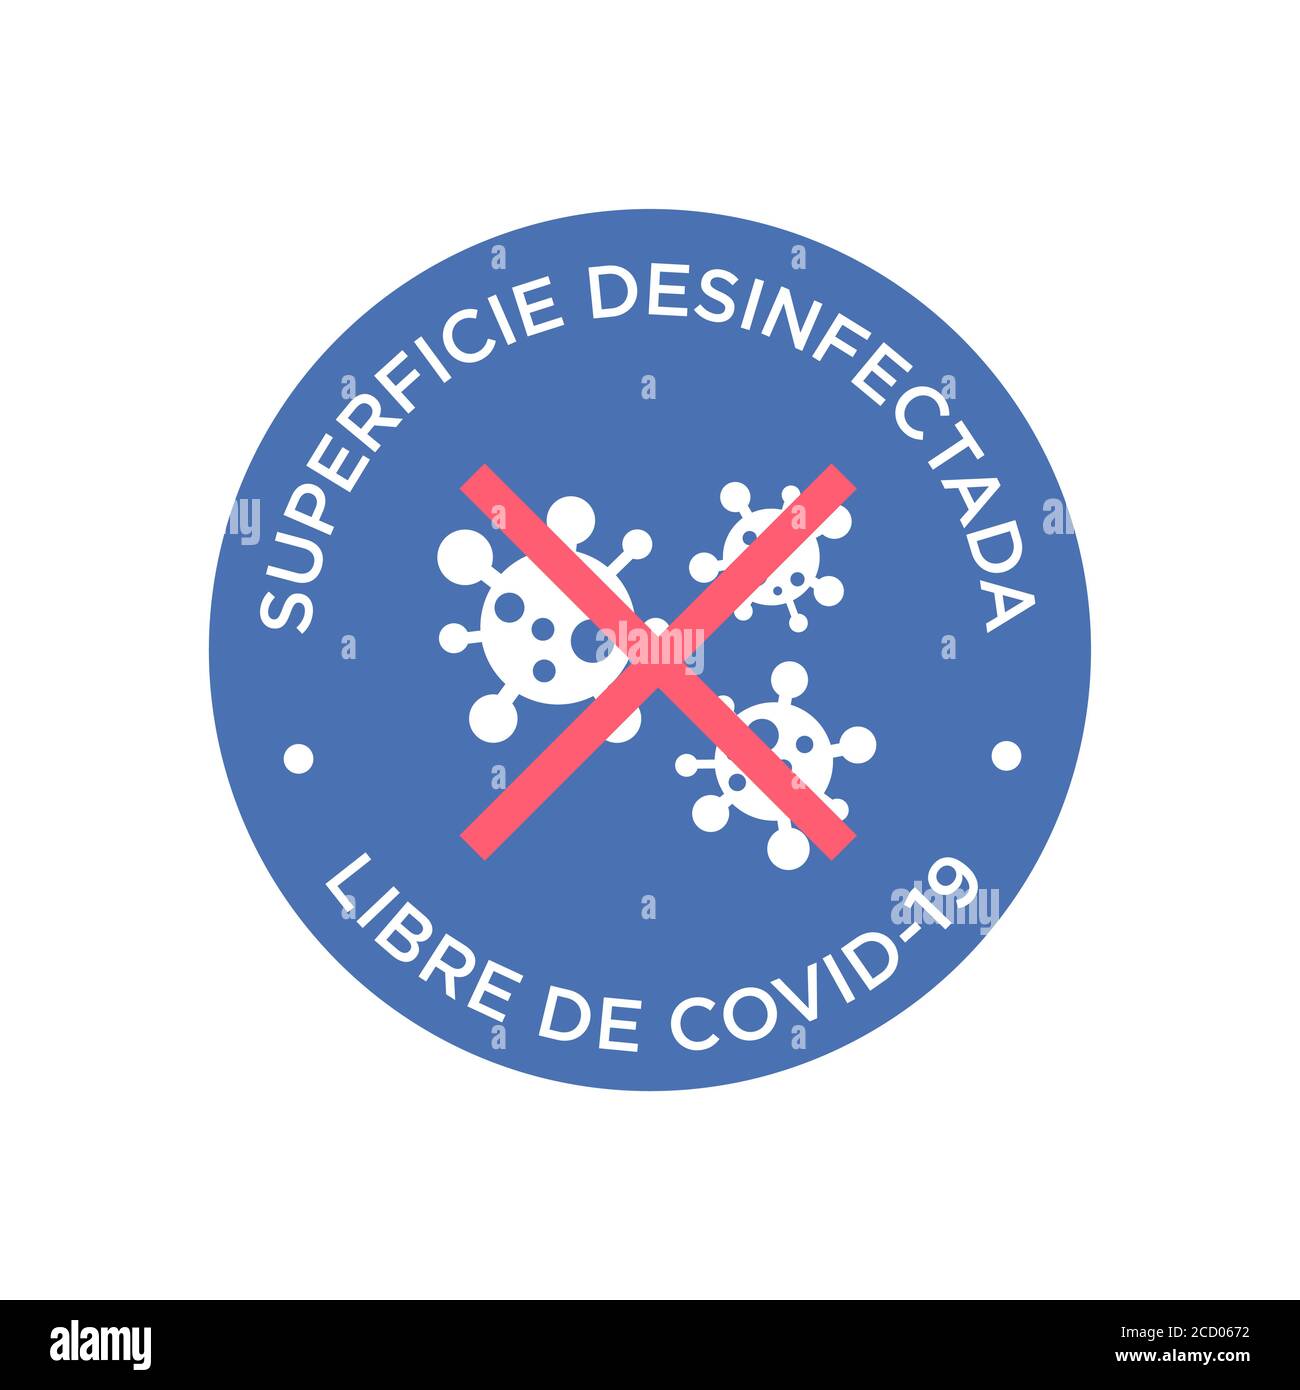 Coronavirus disinfected surface icon written in Spanish. Round symbol for clean areas of Covid-19. Covid free zone. Stock Vector